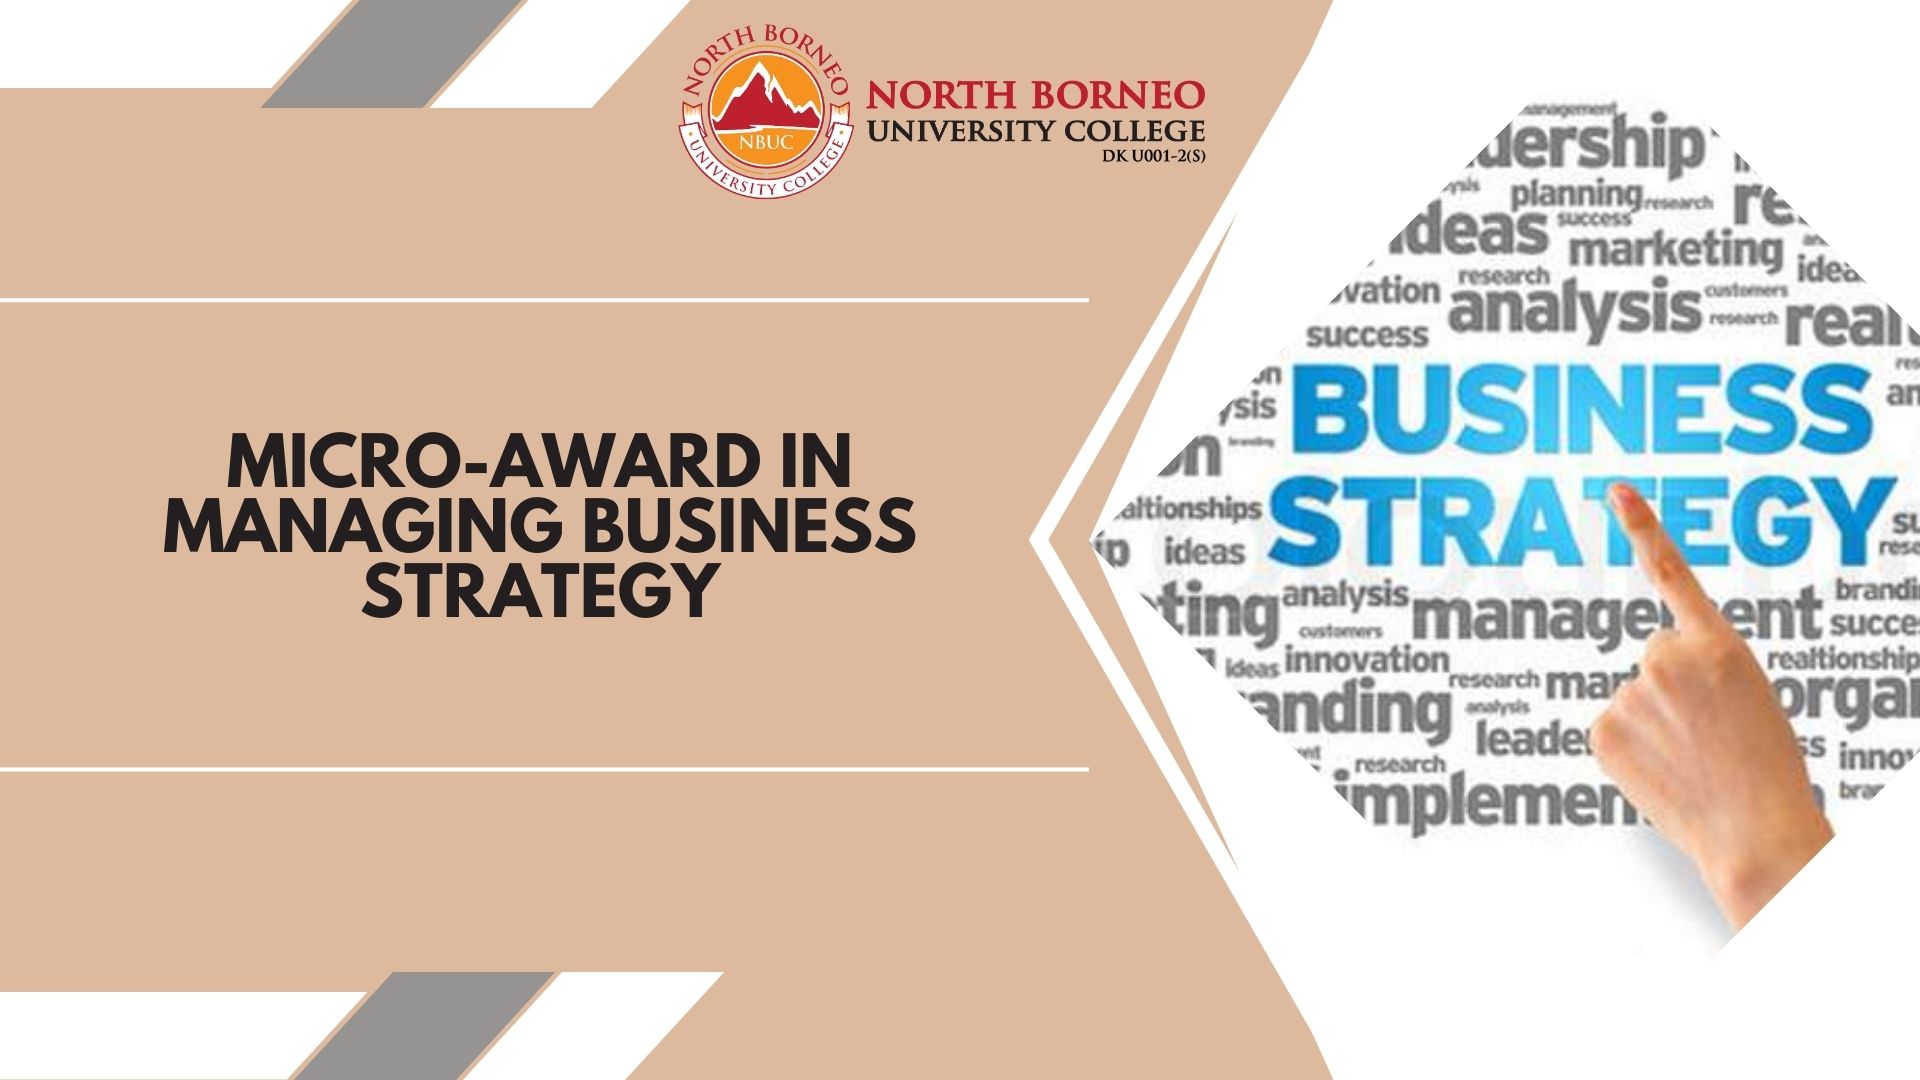 MICRO-AWARD IN MANAGING BUSINESS STRATEGY